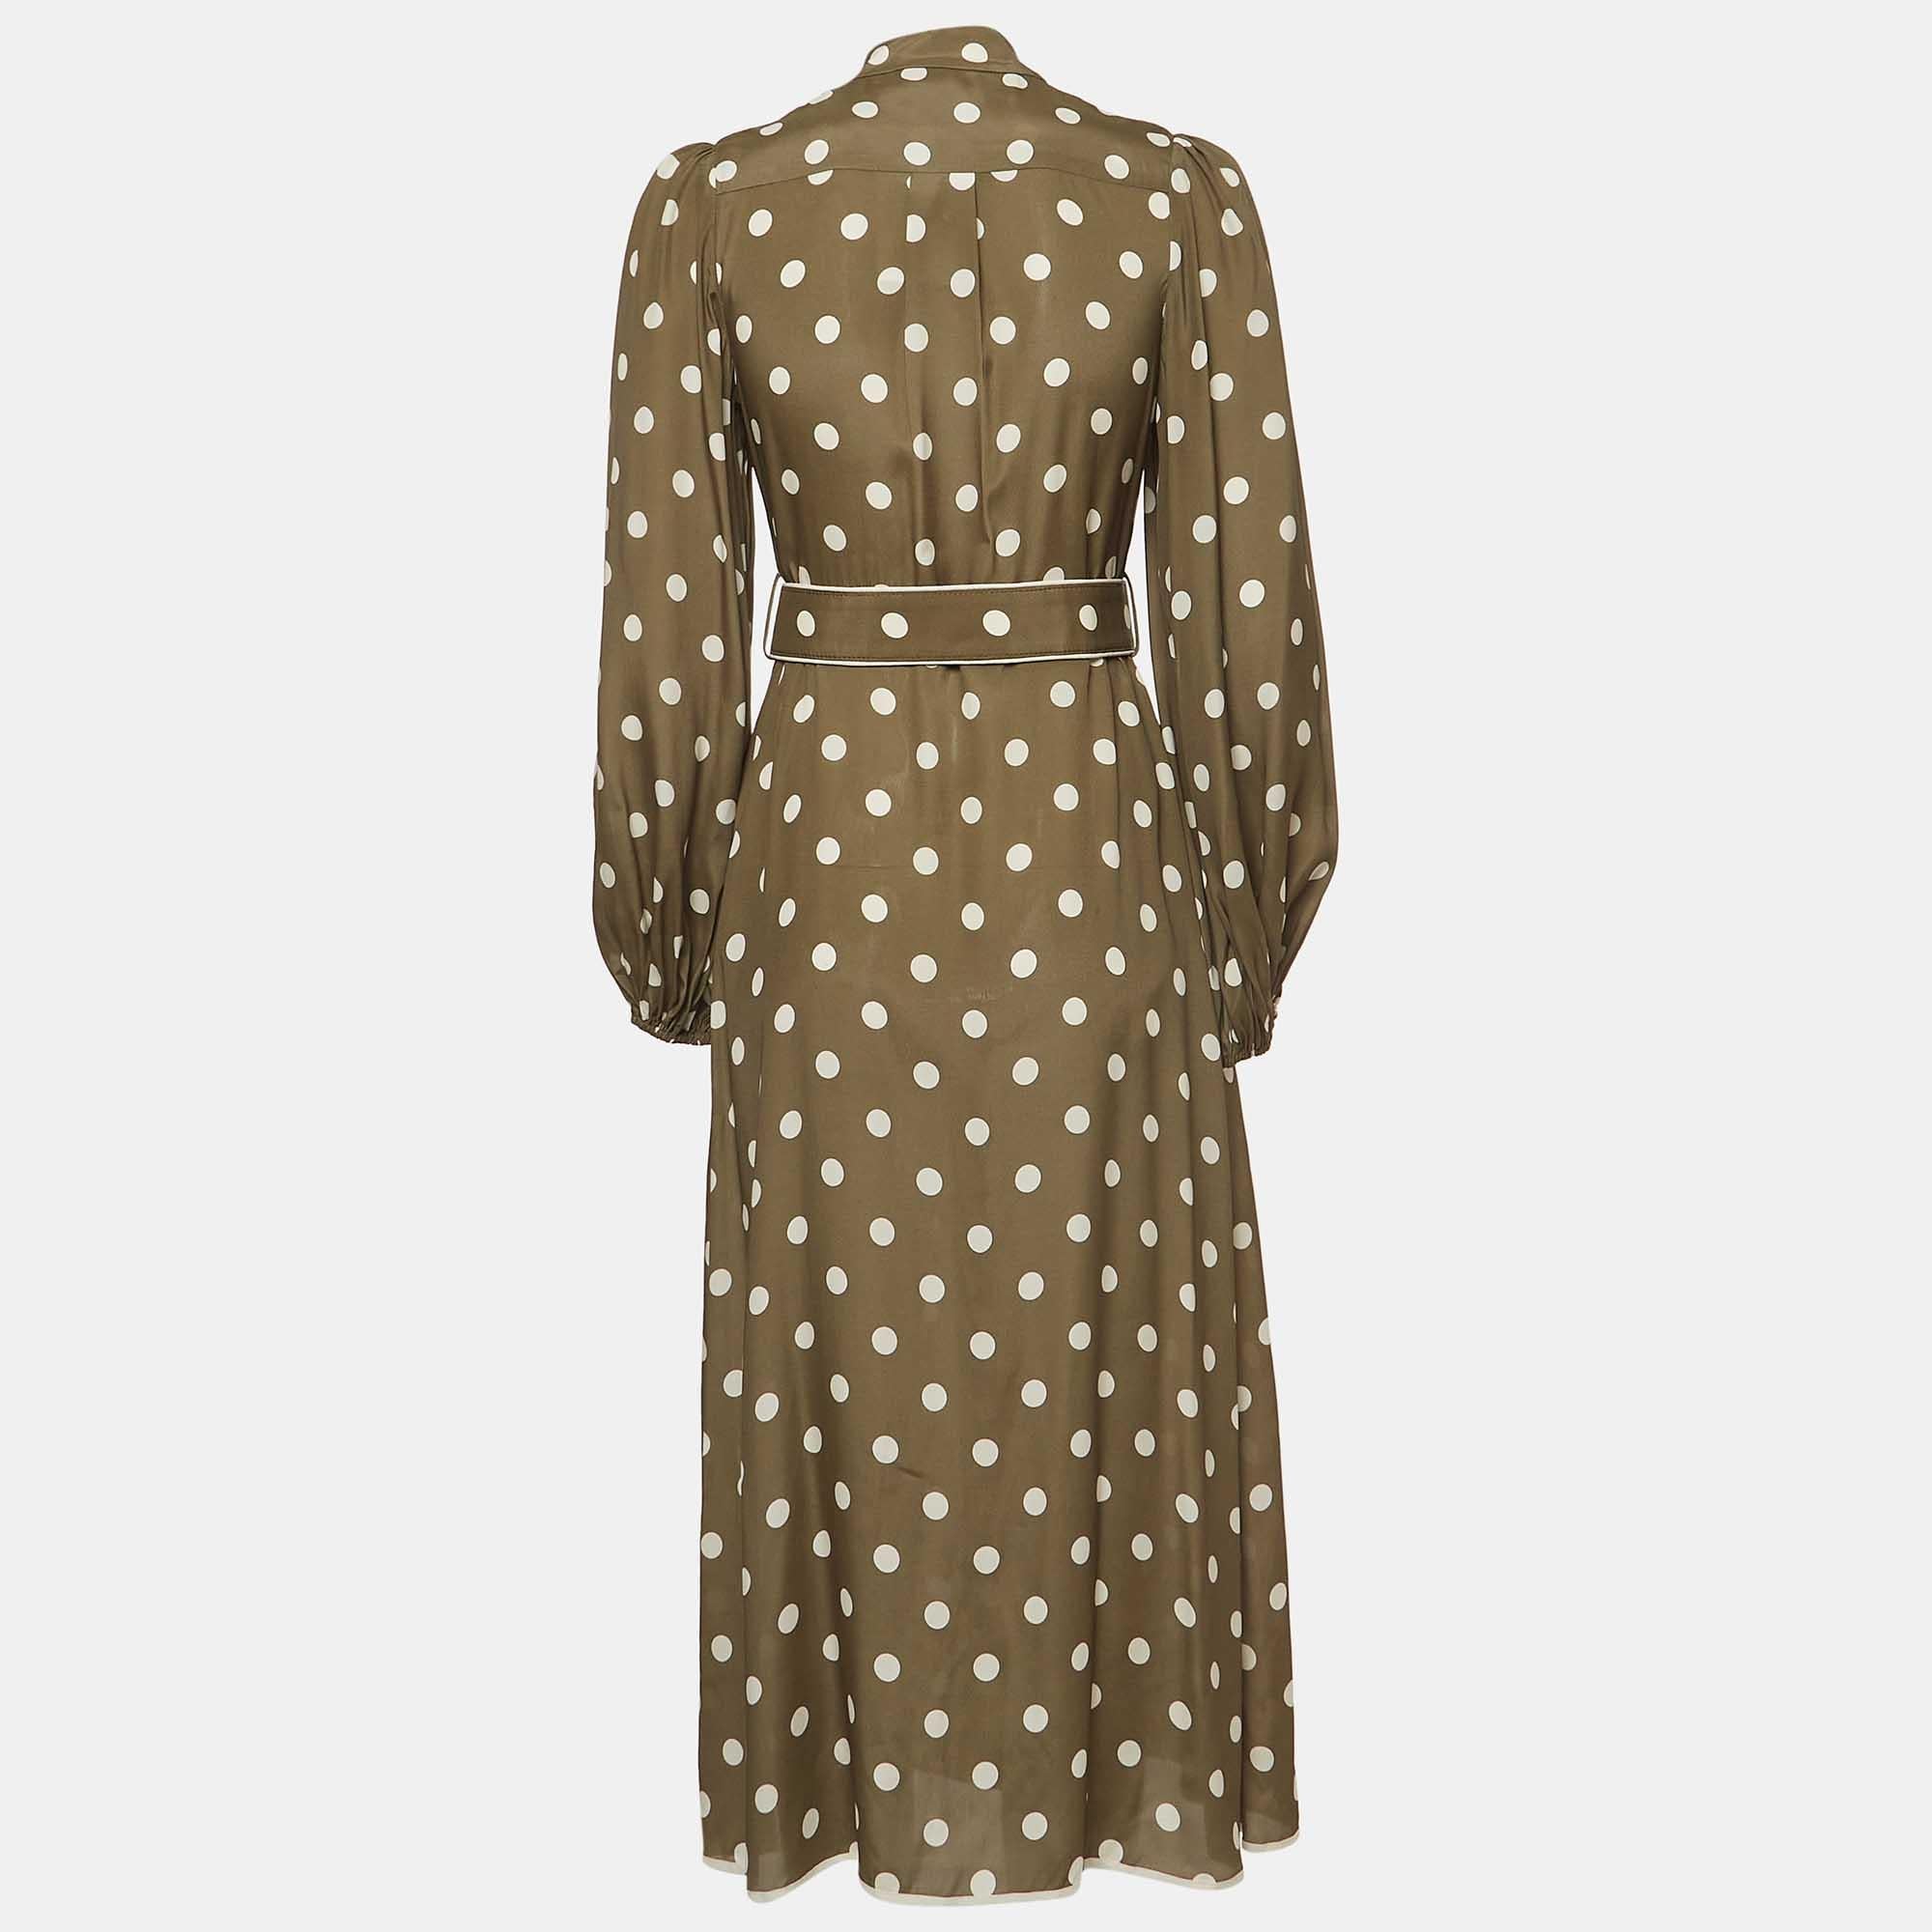 Exhibit a stylish look by wearing this authentic Zimmermann dress. Tailored using a silk blend, this dress has a chic silhouette for a framing fit. Style the creation with chic accessories and pumps.

